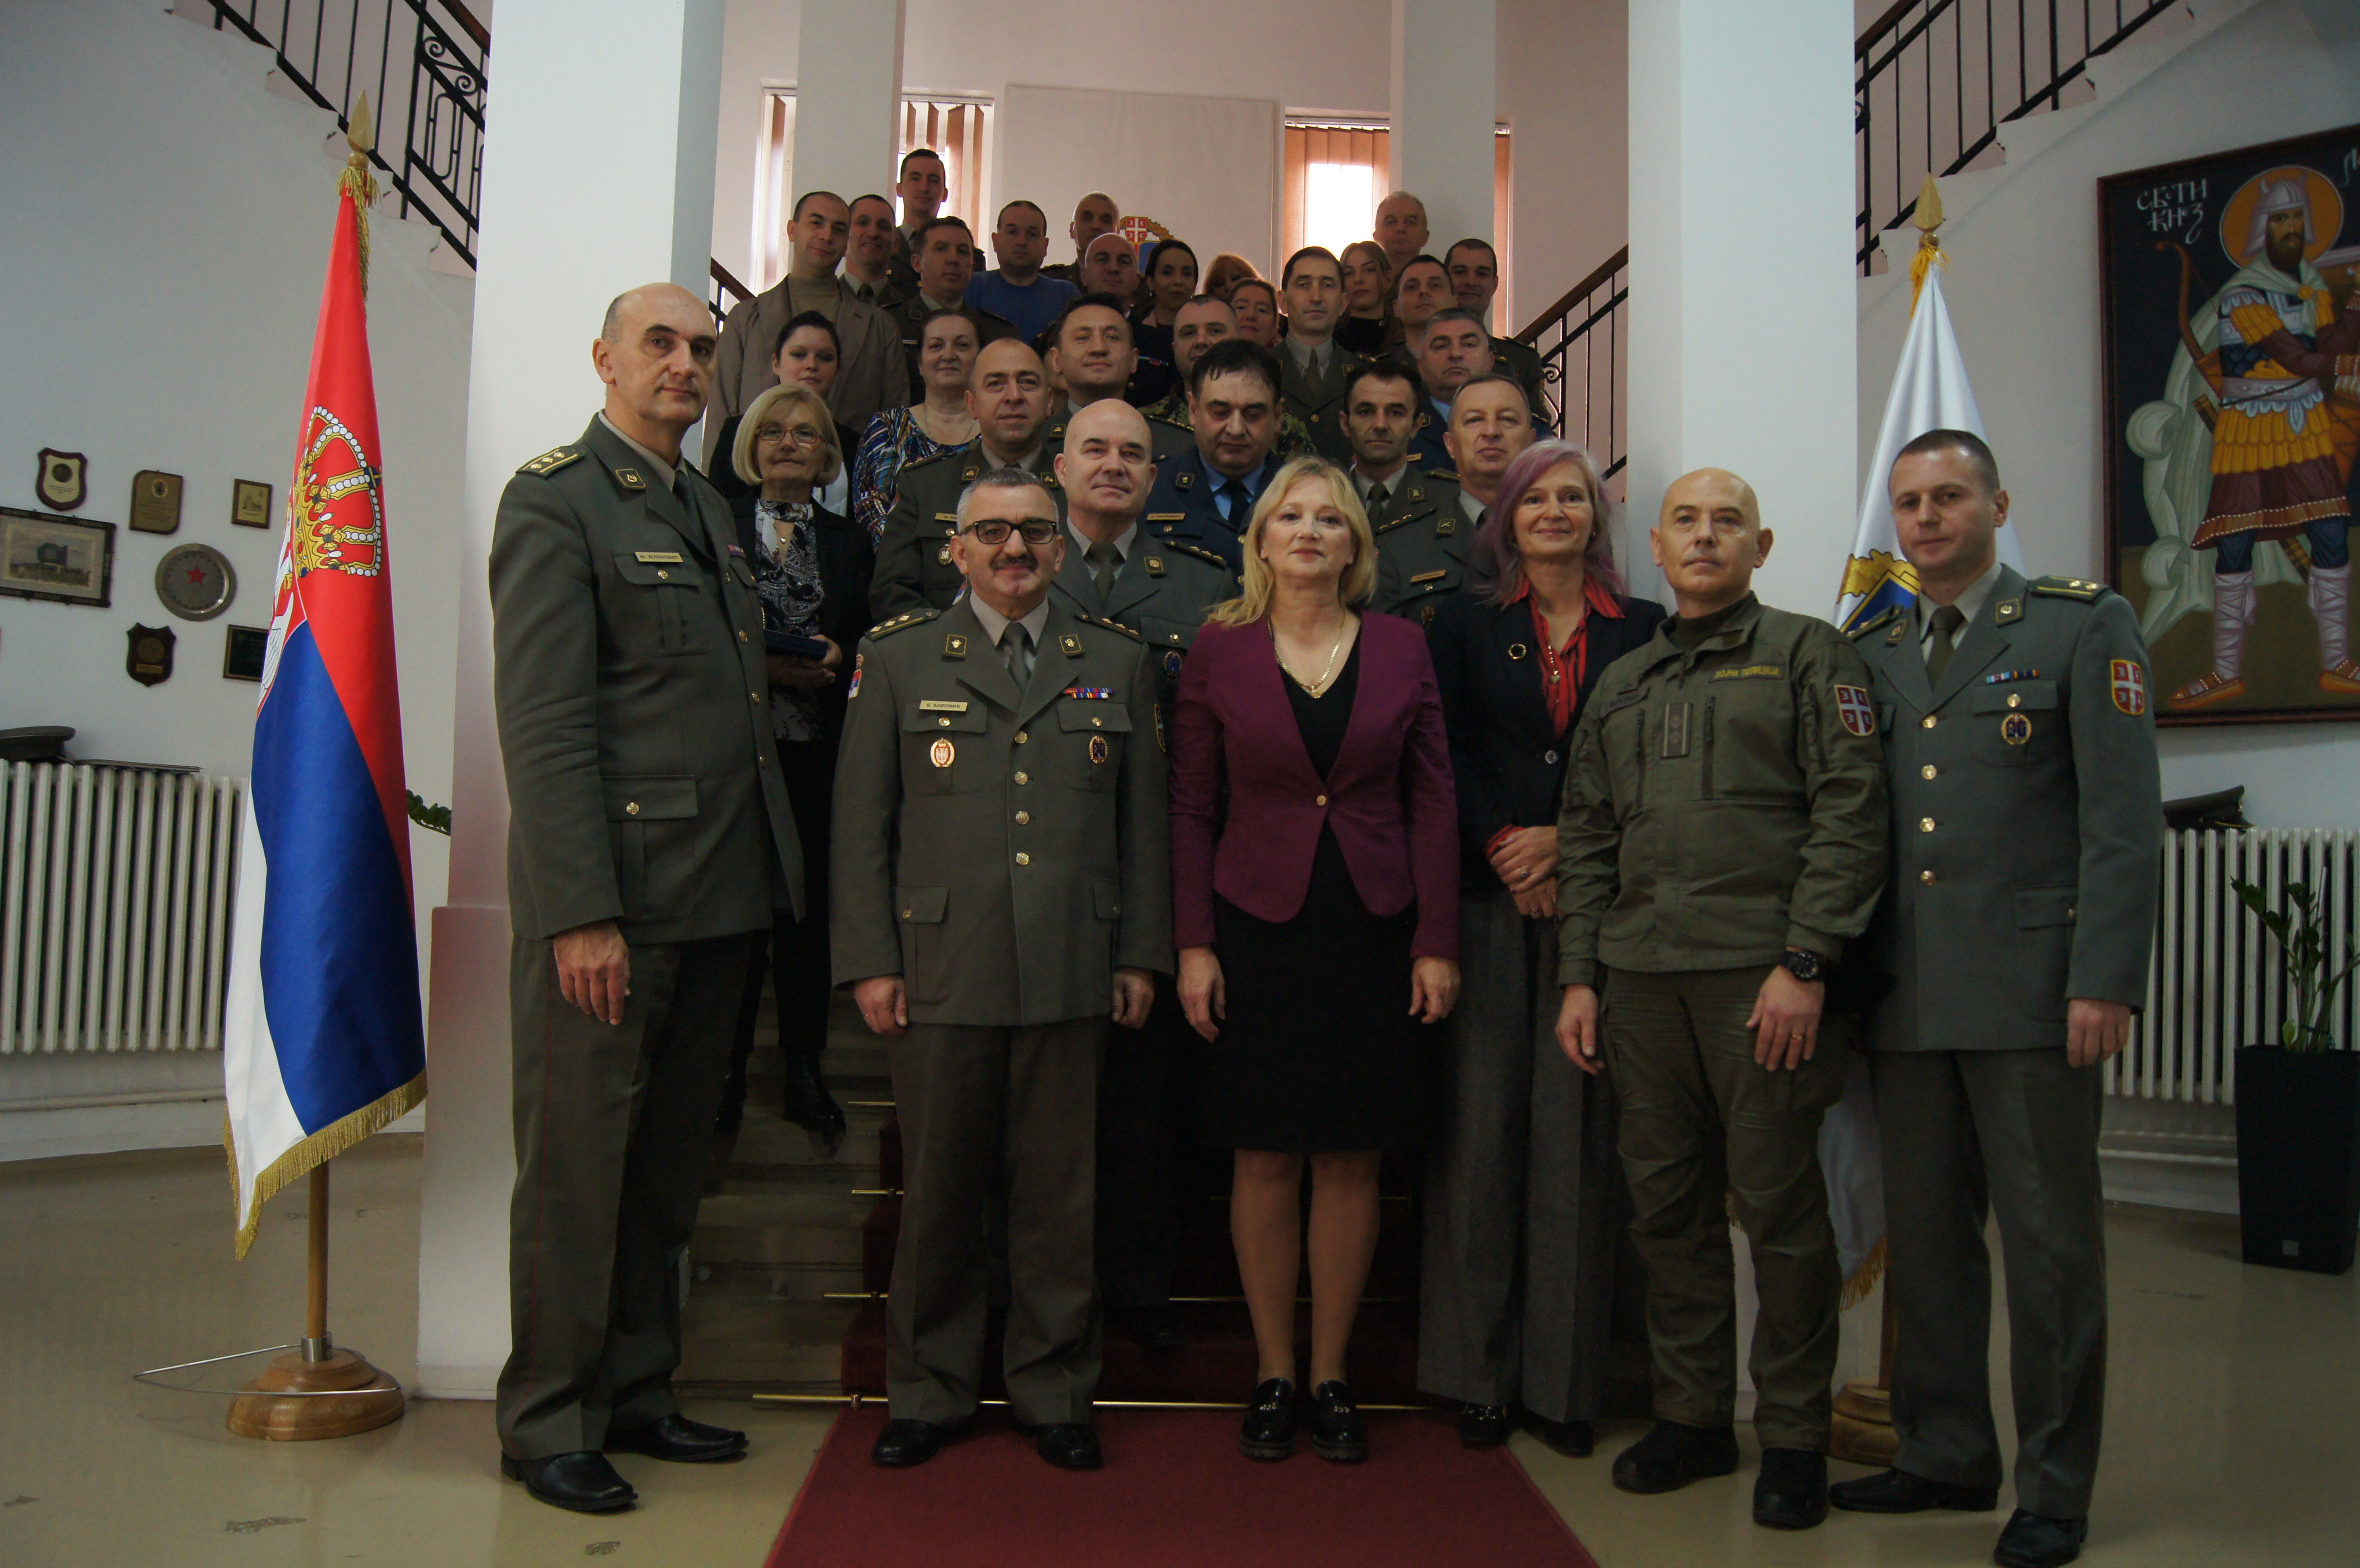 The end of the Calendar Year at the University of Defence marked